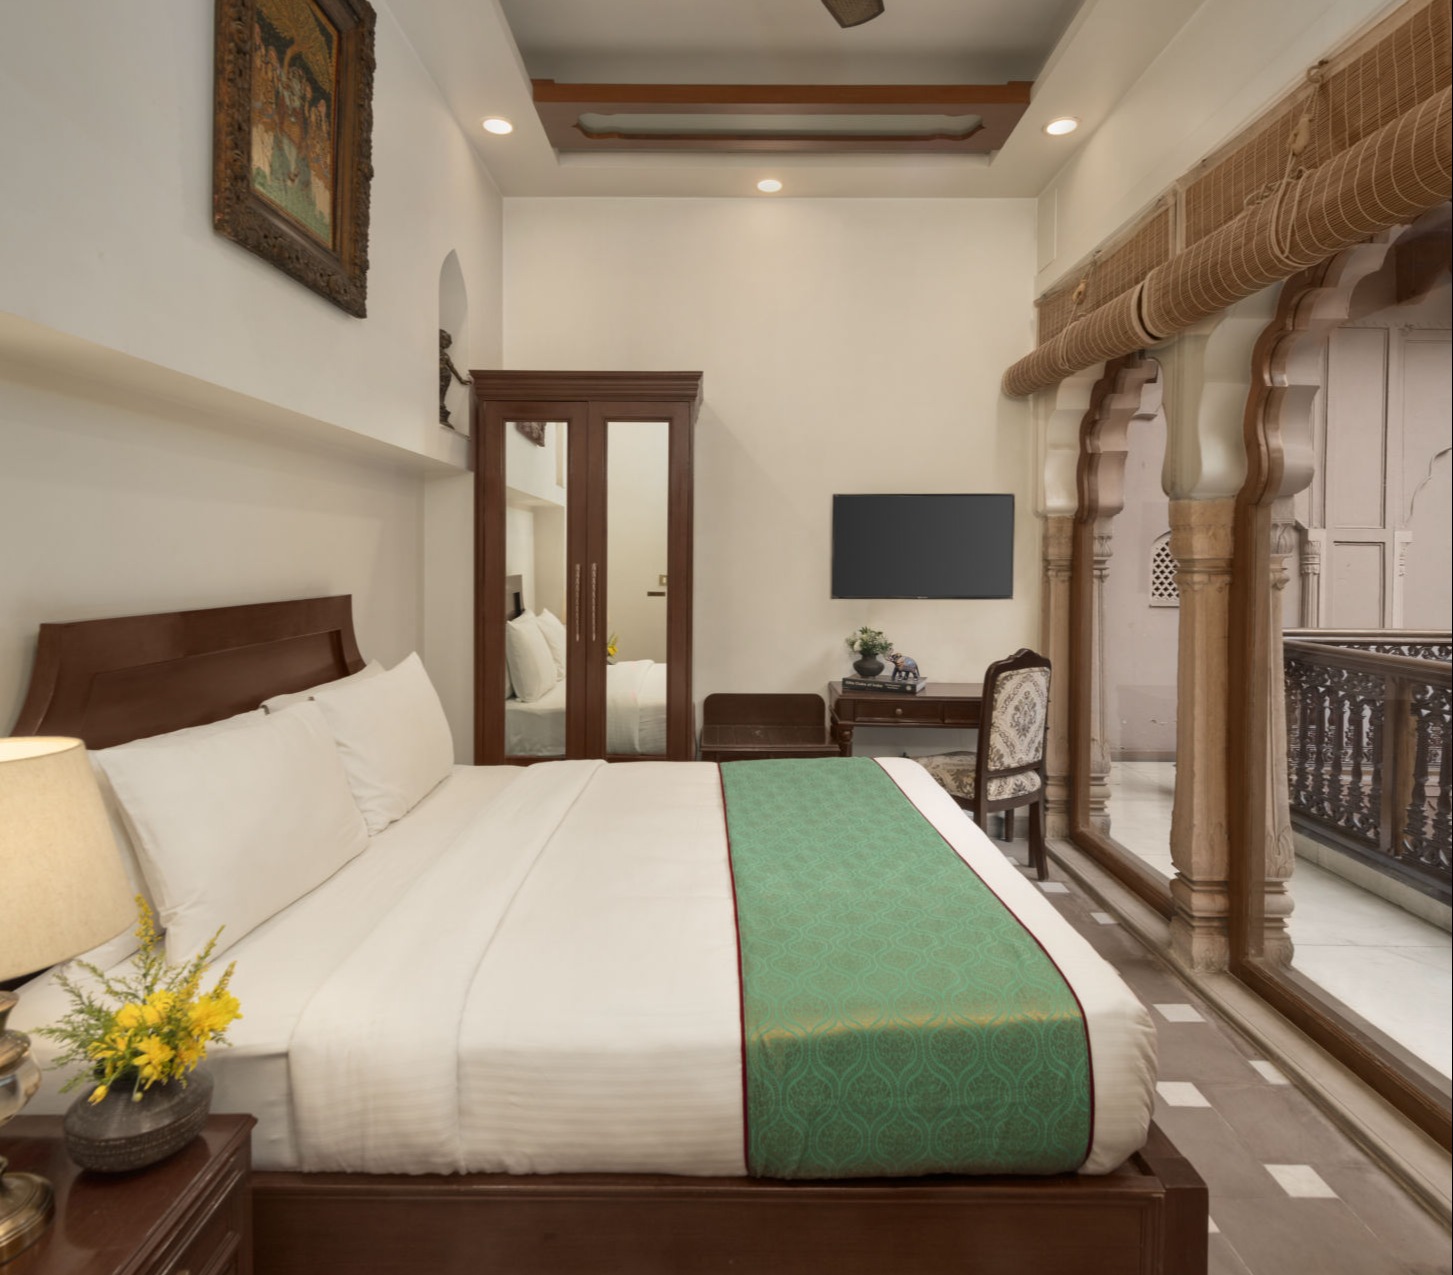 Enjoy a cosy ambience when you stay in one of our Jharoka Rooms at Haveli Dharampura, Old Delhi